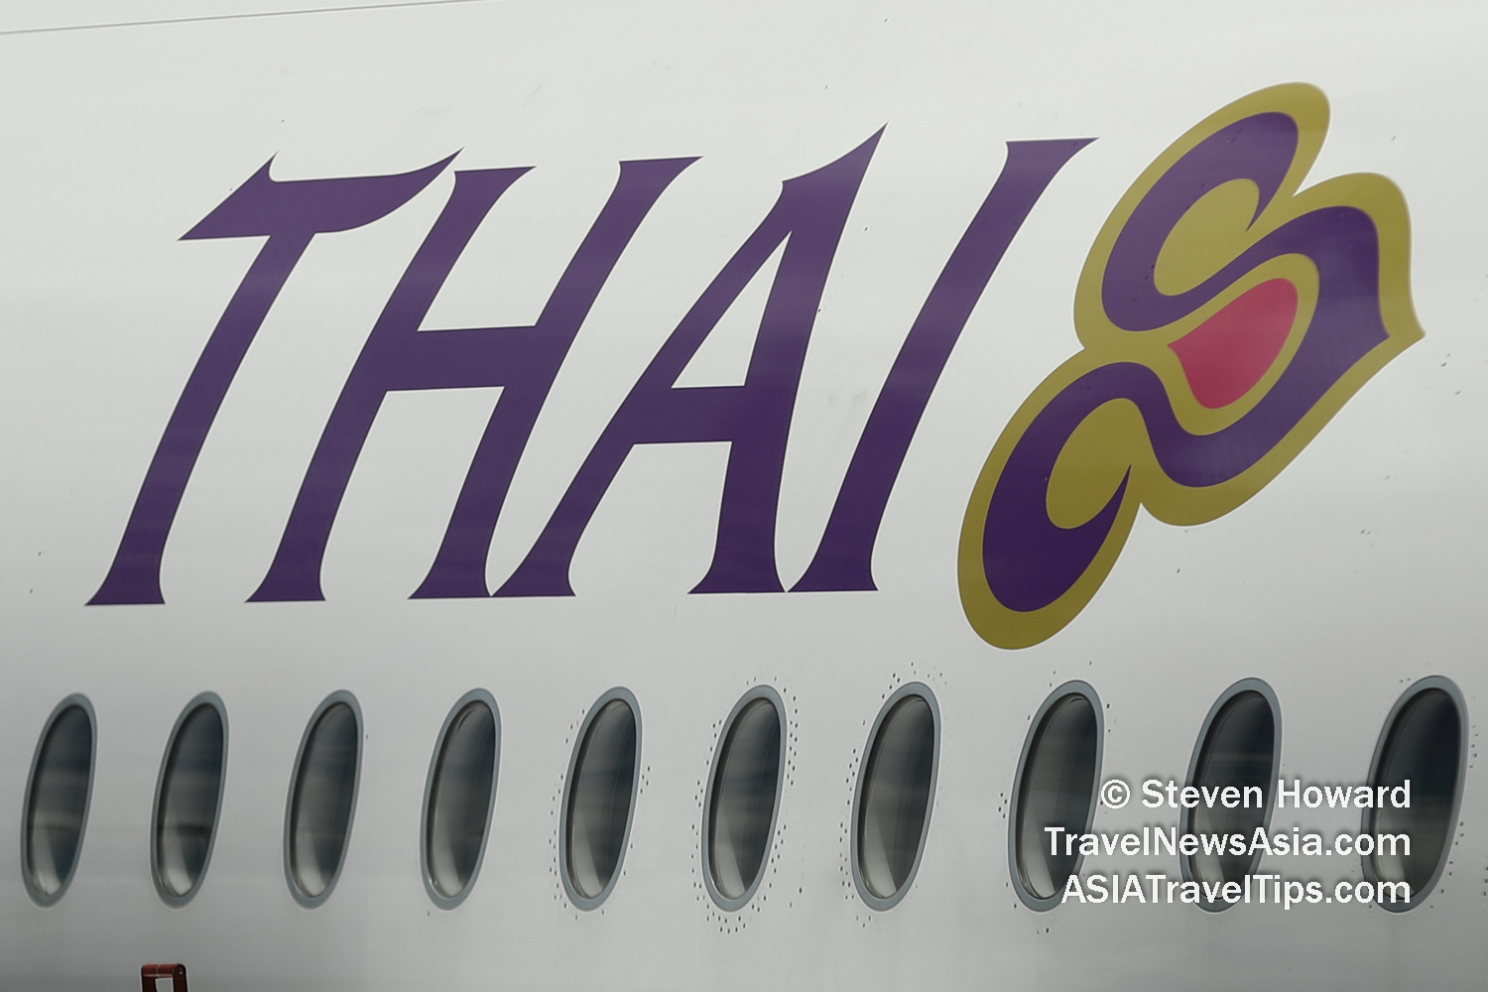 Thai Airways livery. Picture by Steven Howard of TravelNewsAsia.com Click to enlarge.